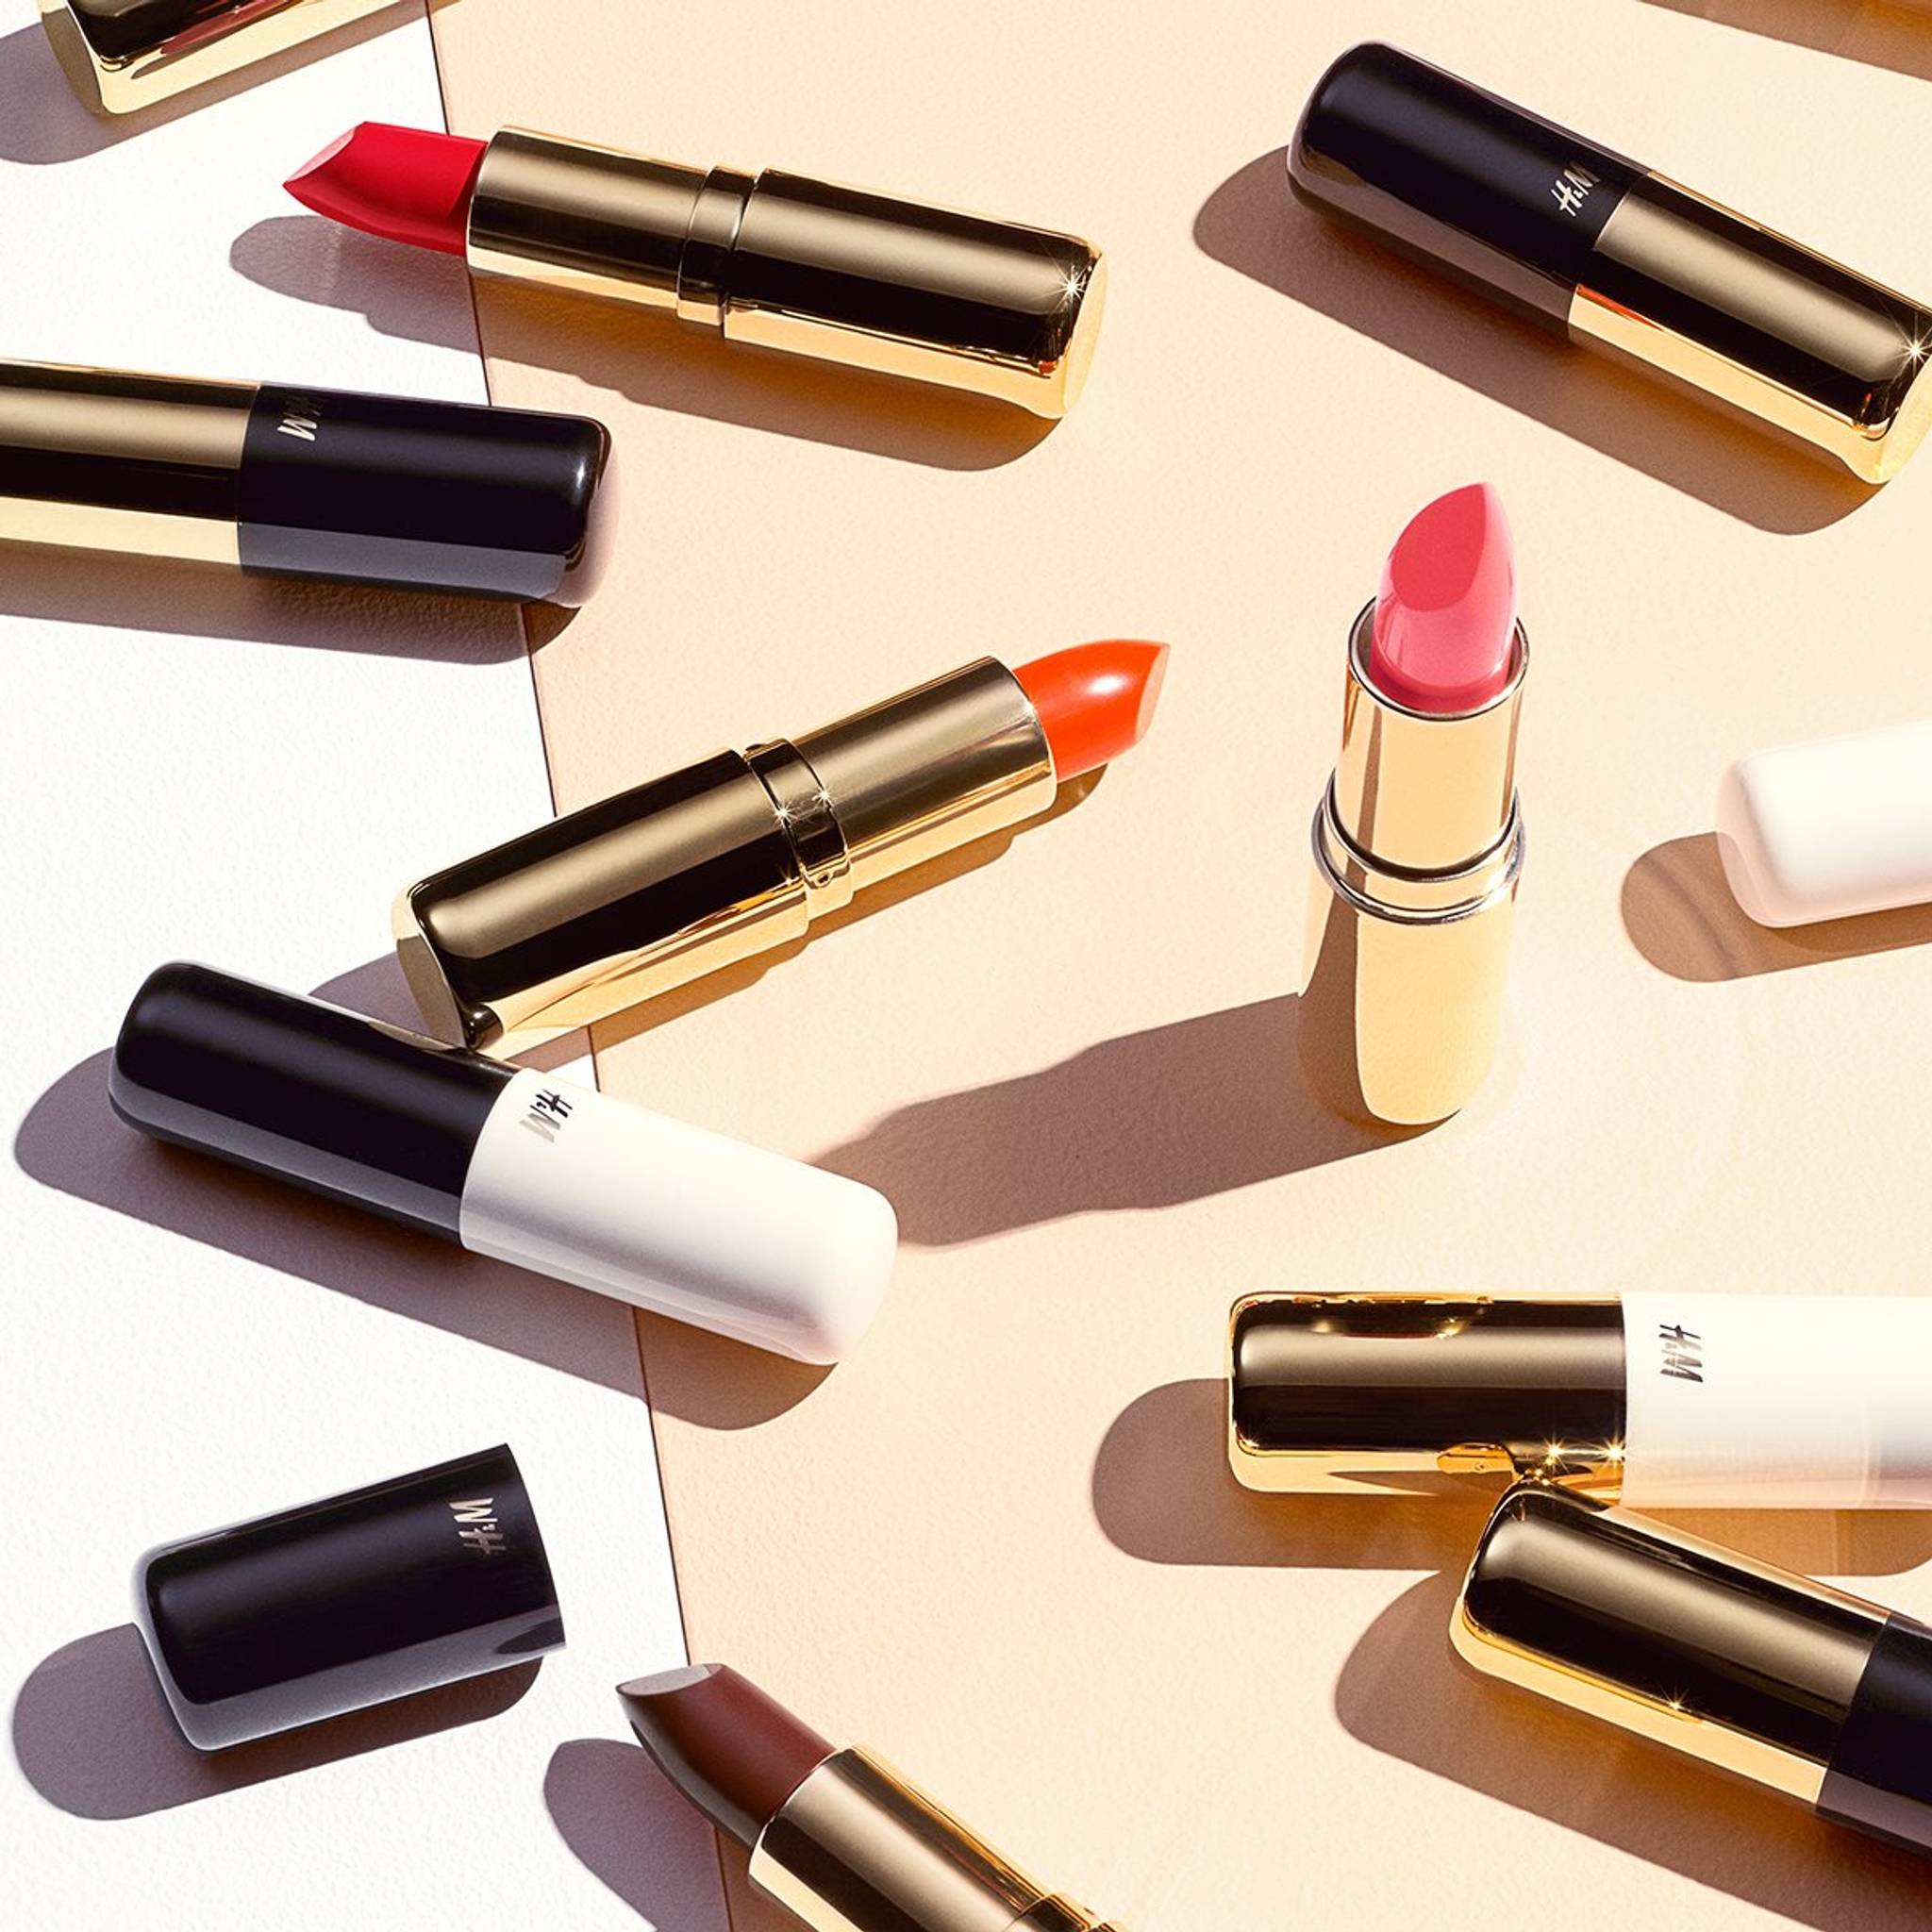 H&M joins the high street make-up movement